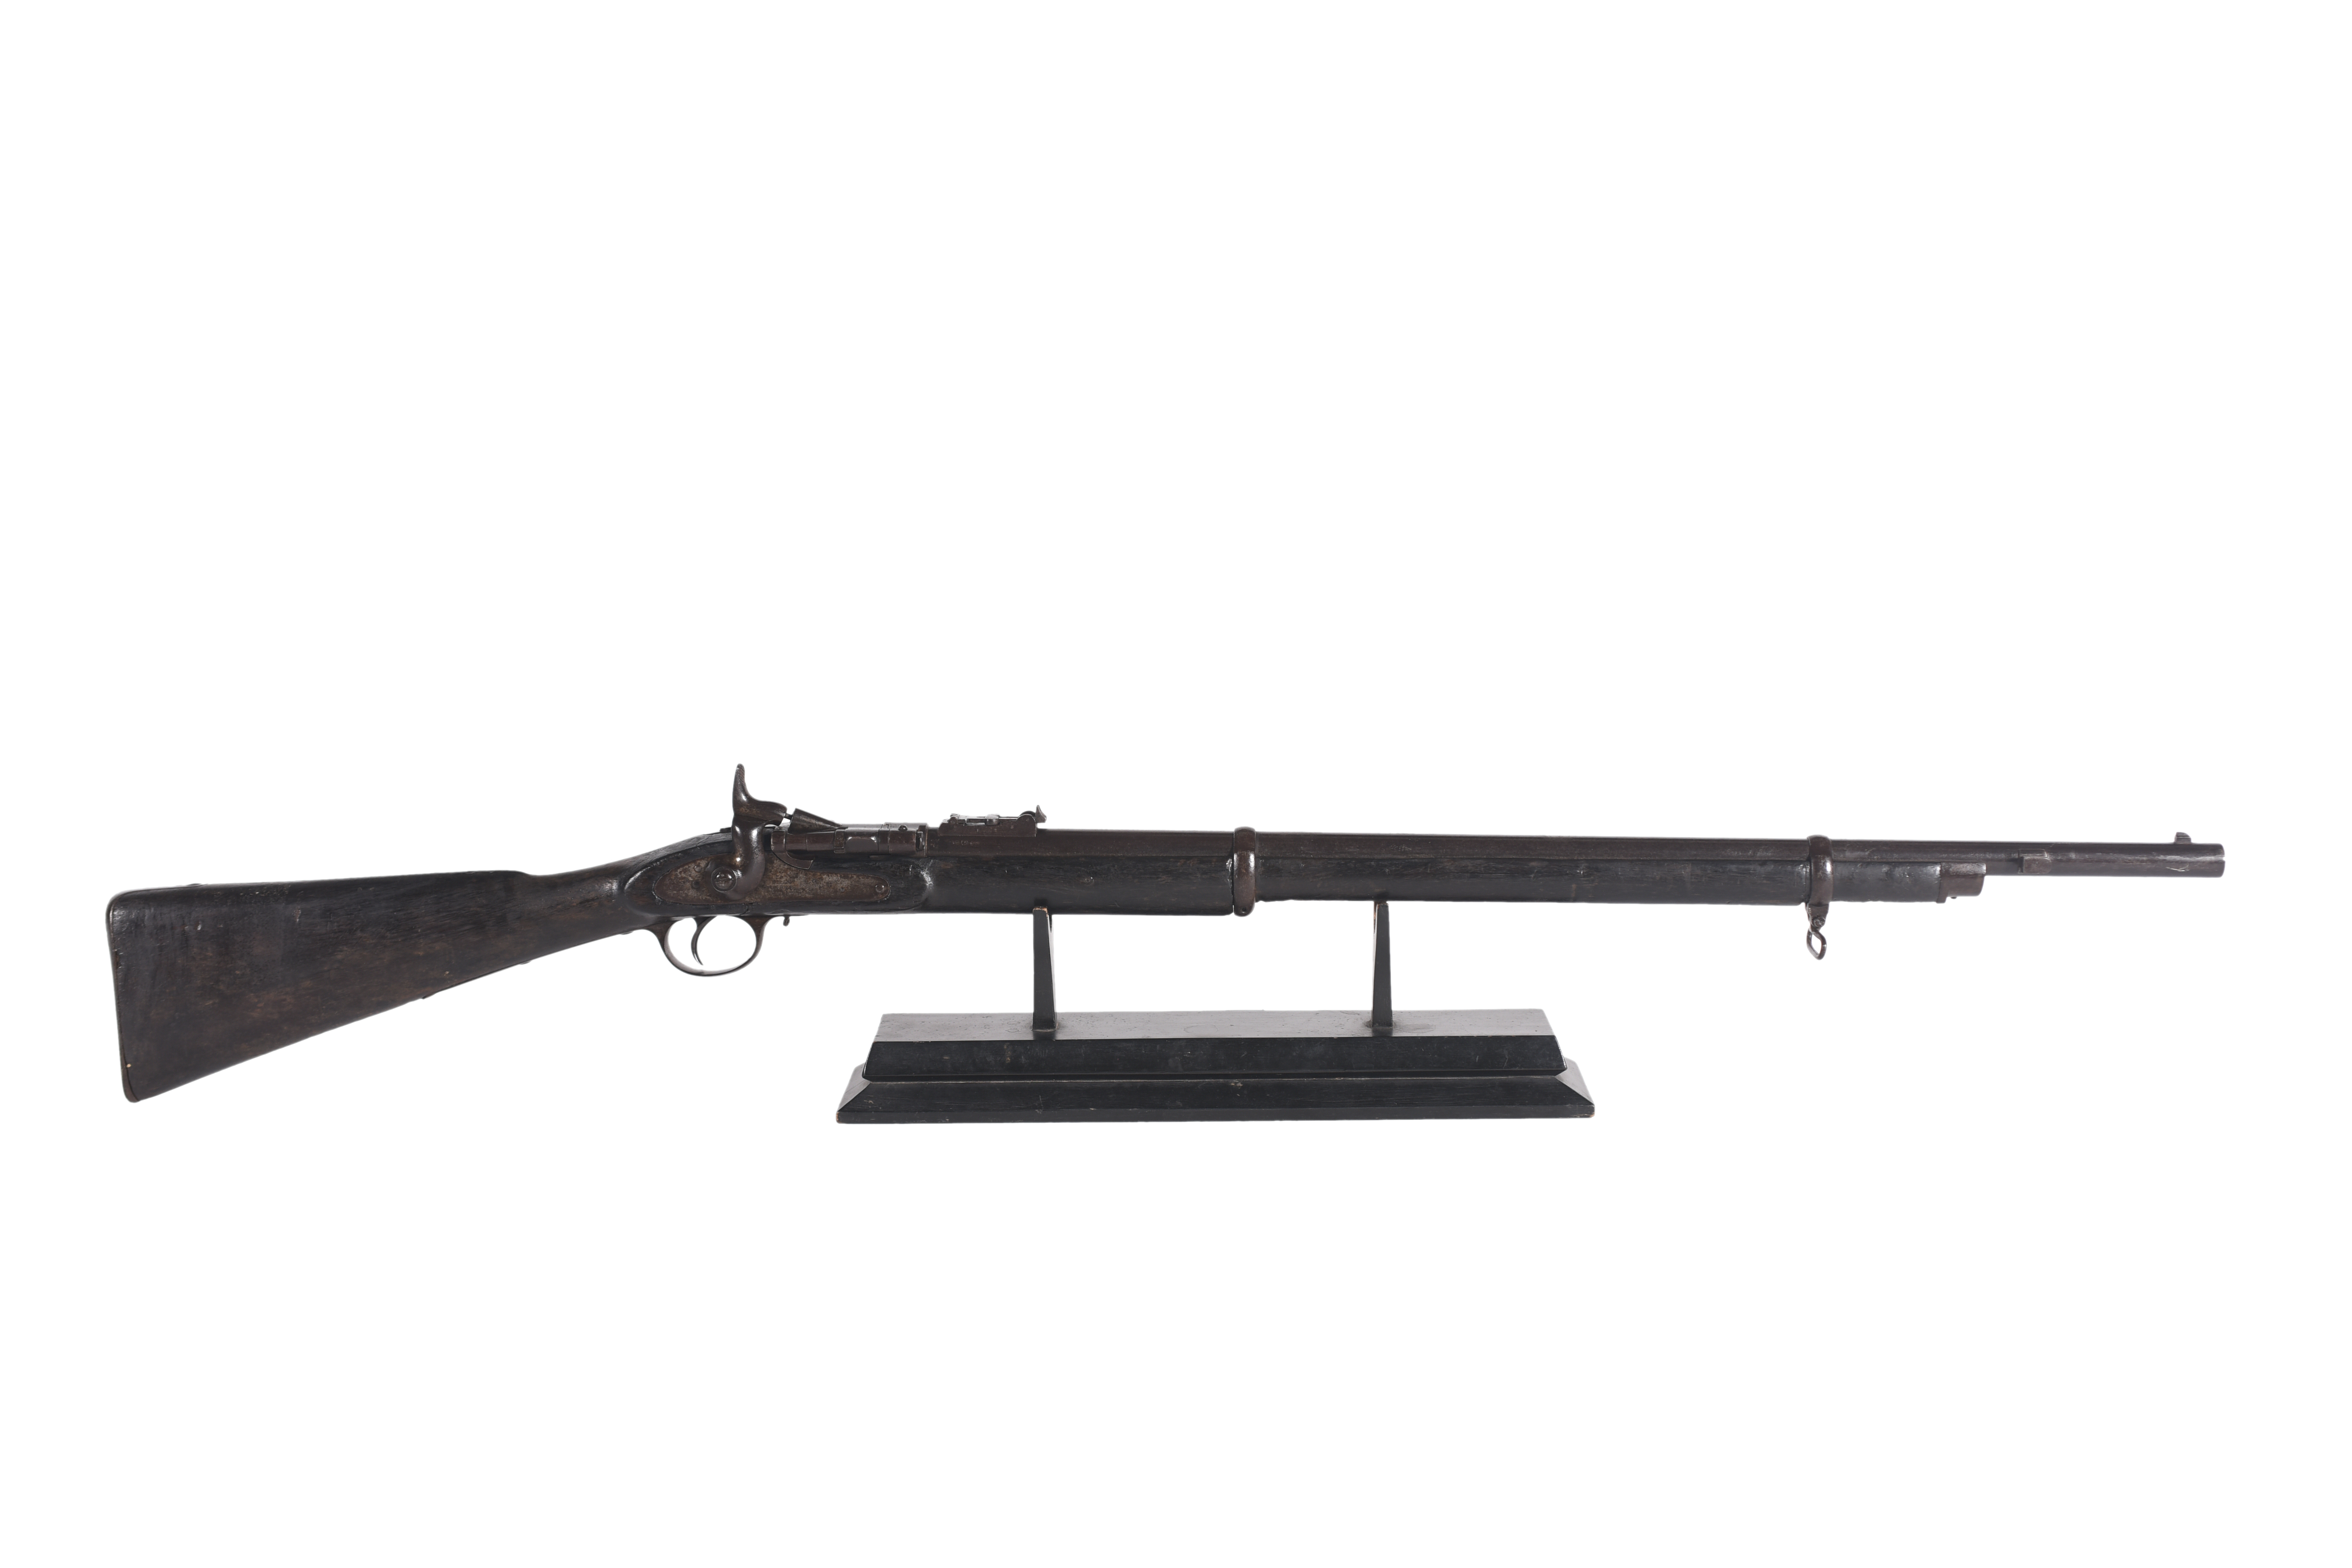 Snider-Enfield rifle